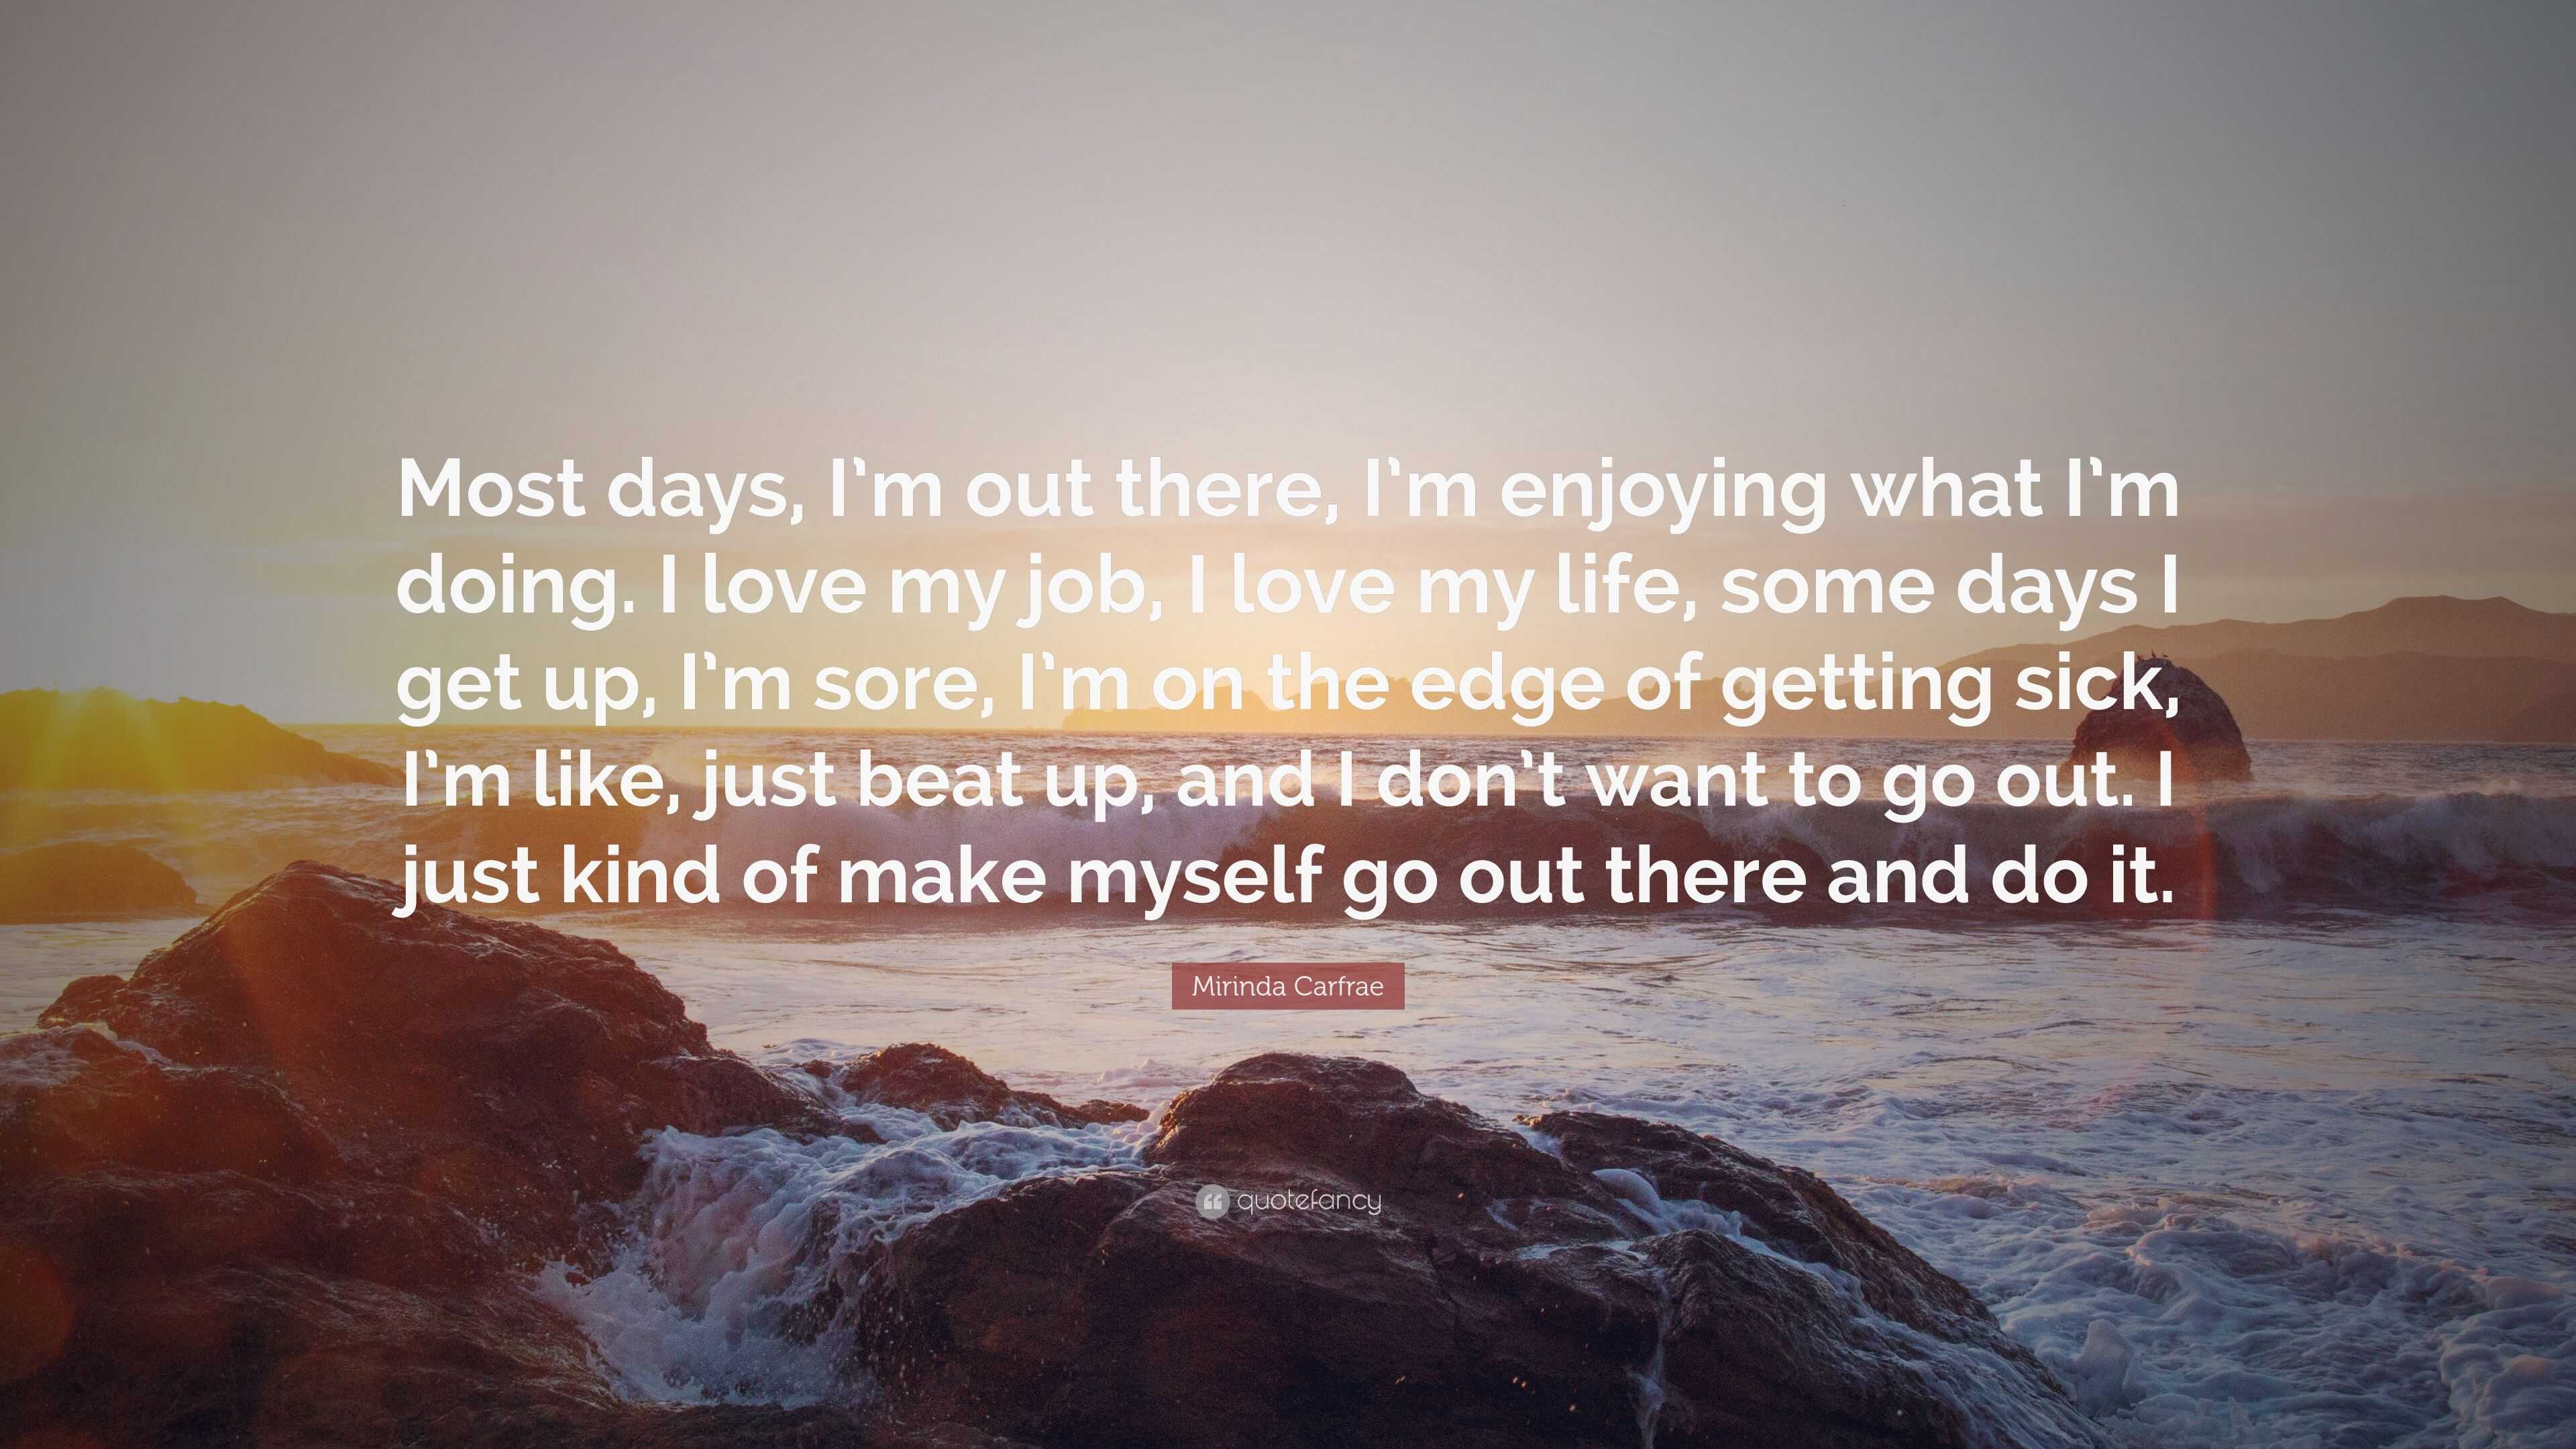 Mirinda Carfrae Quote “Most days I m out there I